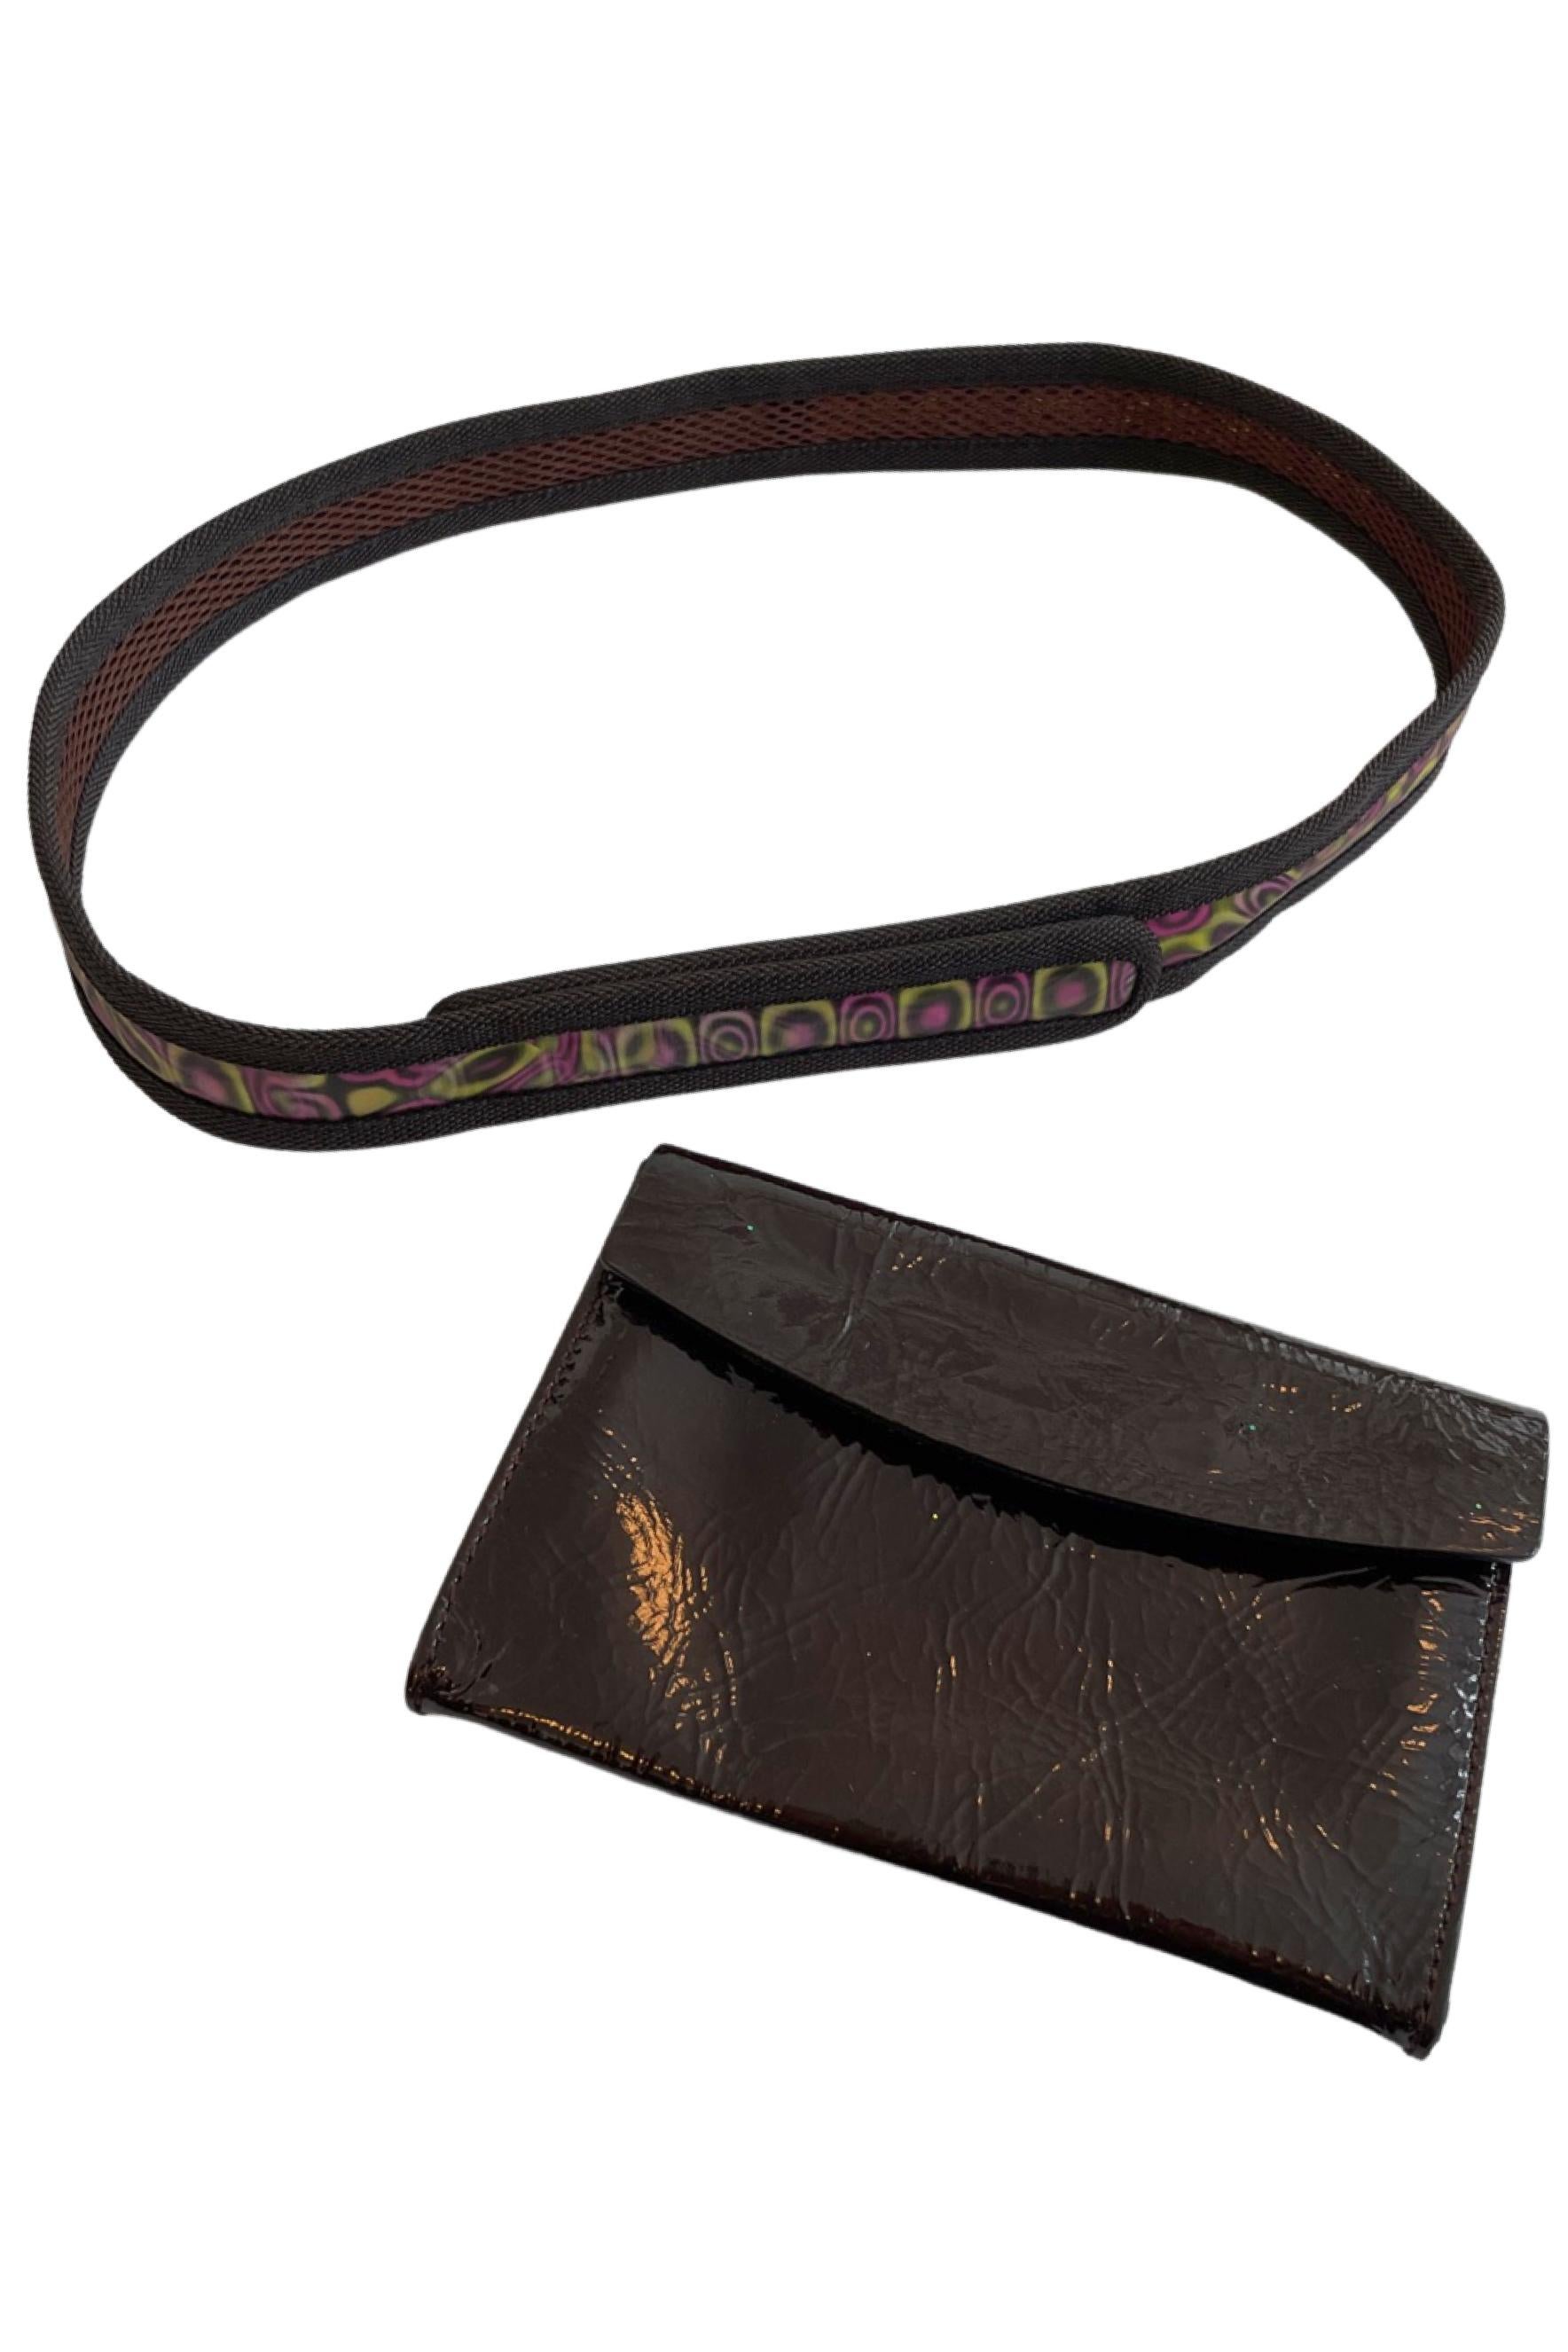 Miu Miu Brown Patent Leather Psychedelic Waist Bag Belt For Sale 3